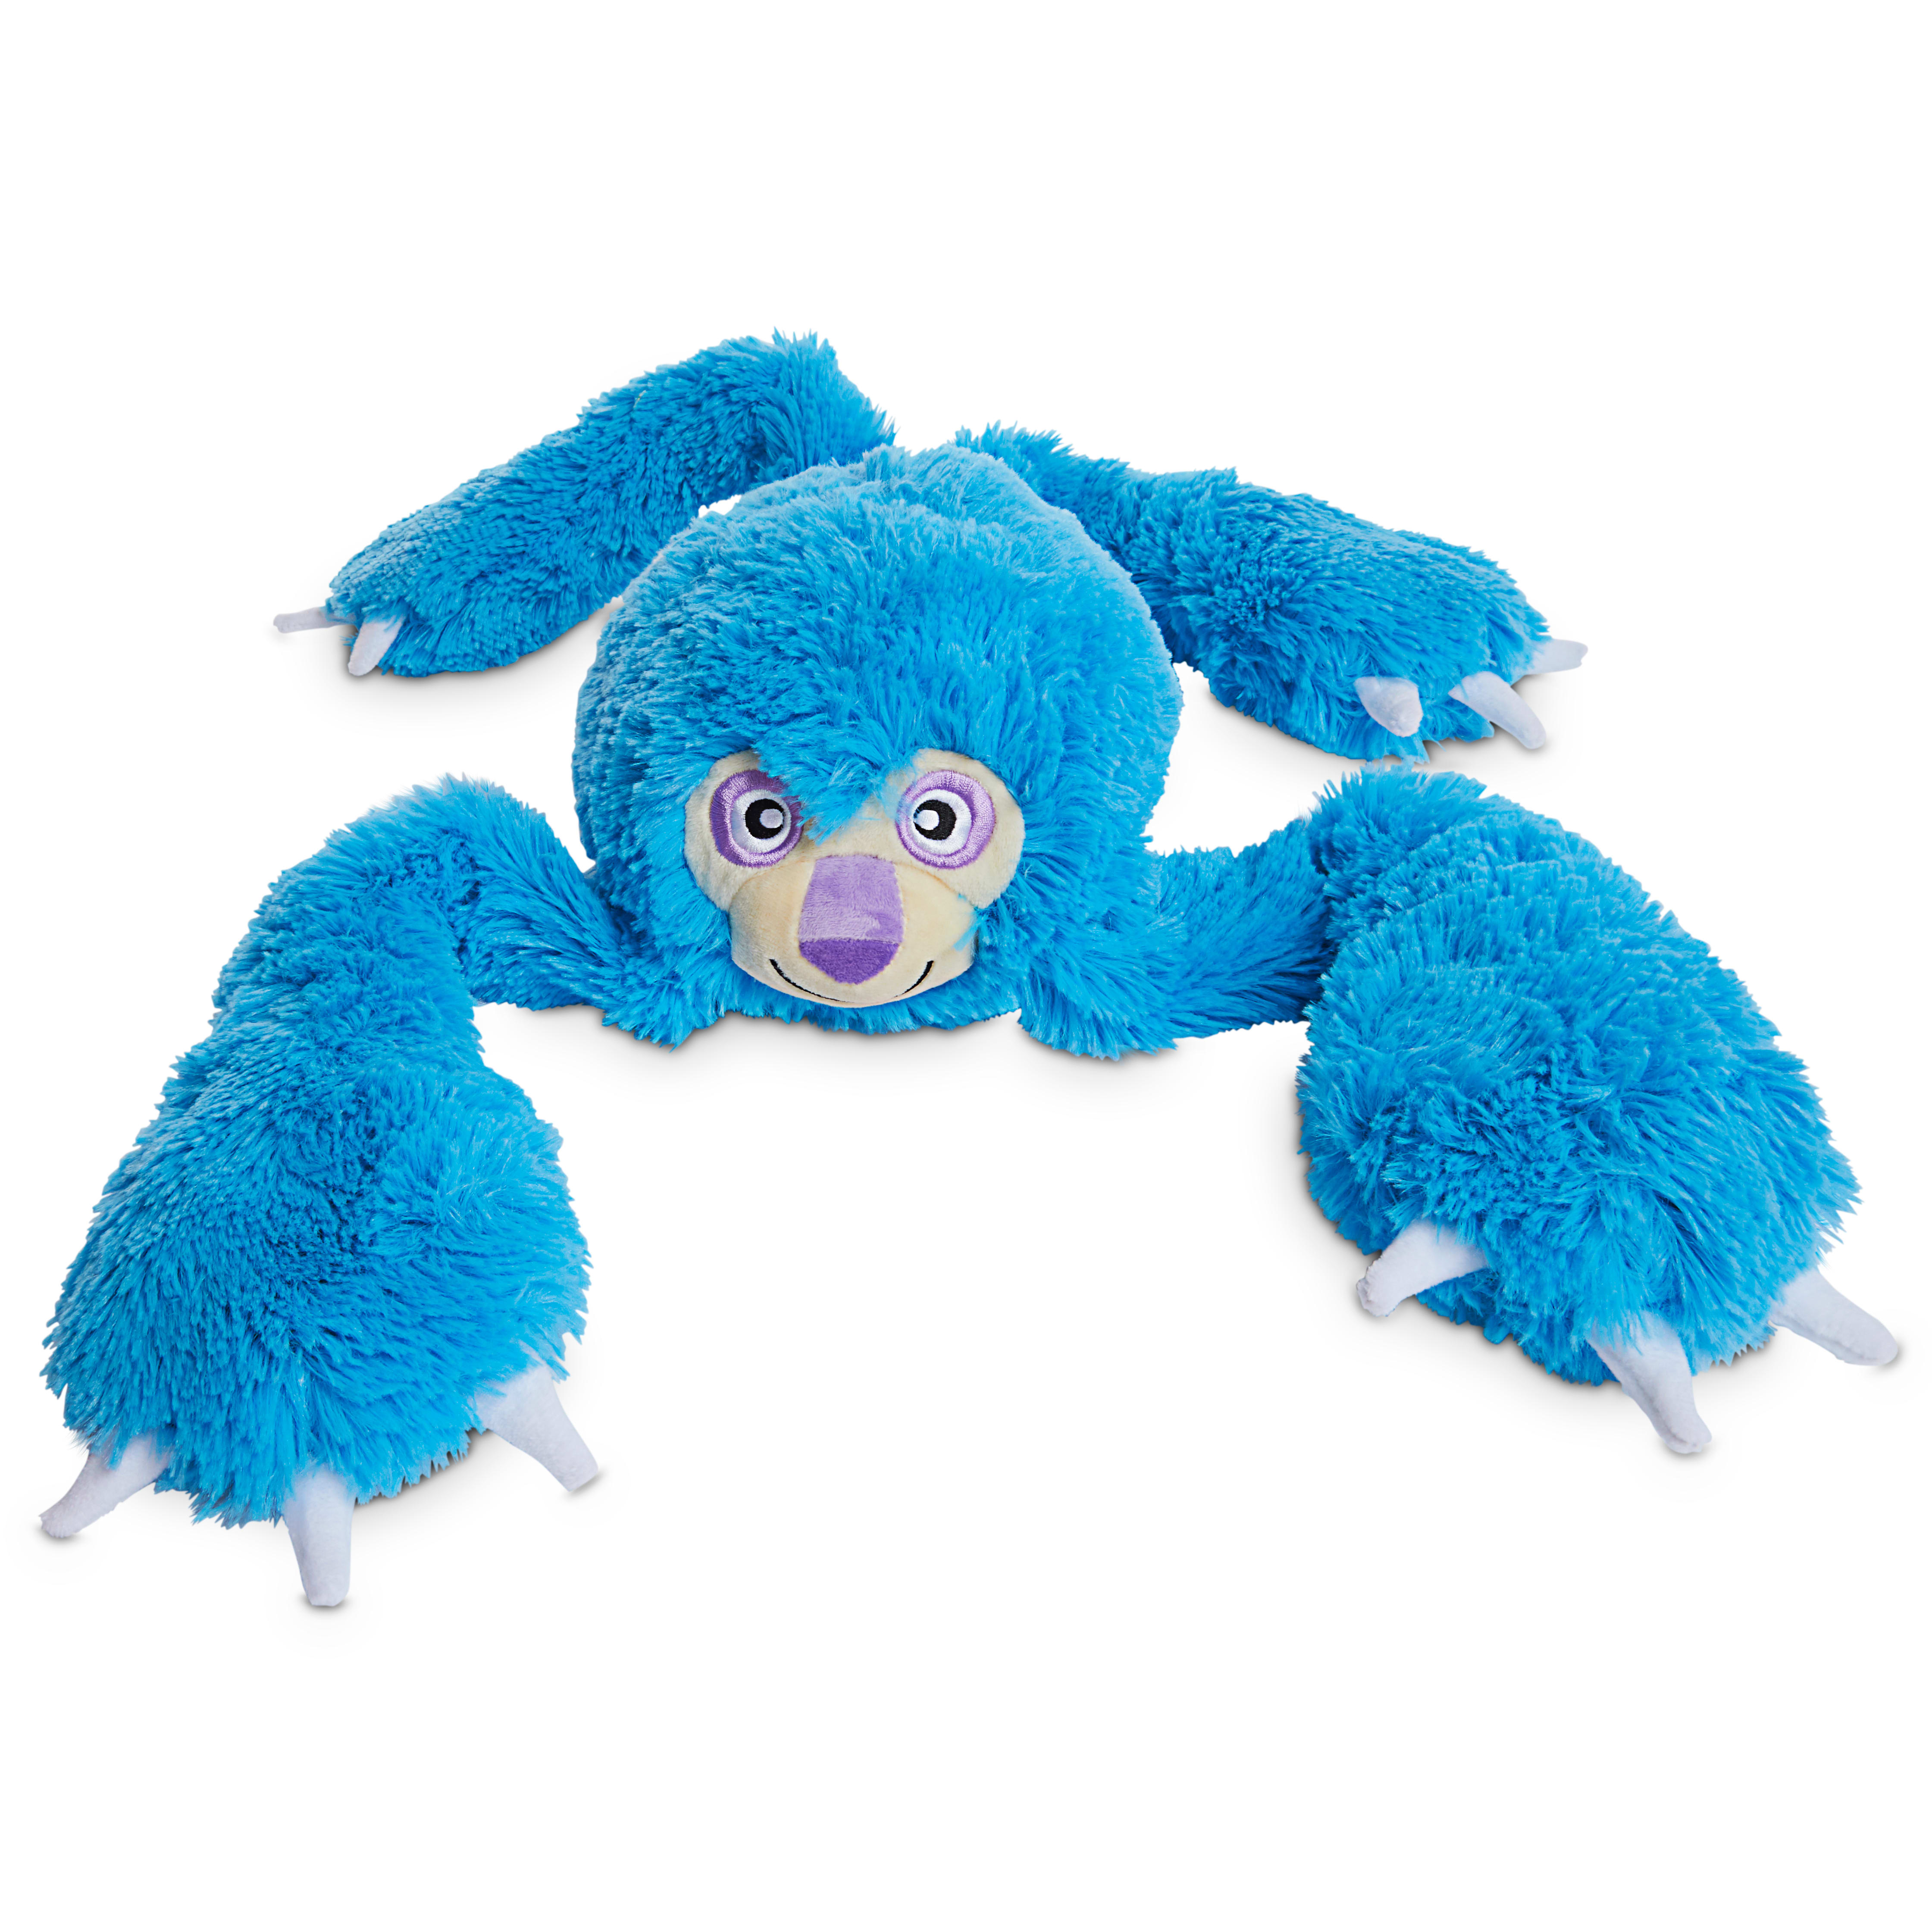 Leaps & Bounds Chocolate Monster Dog Toy, Medium